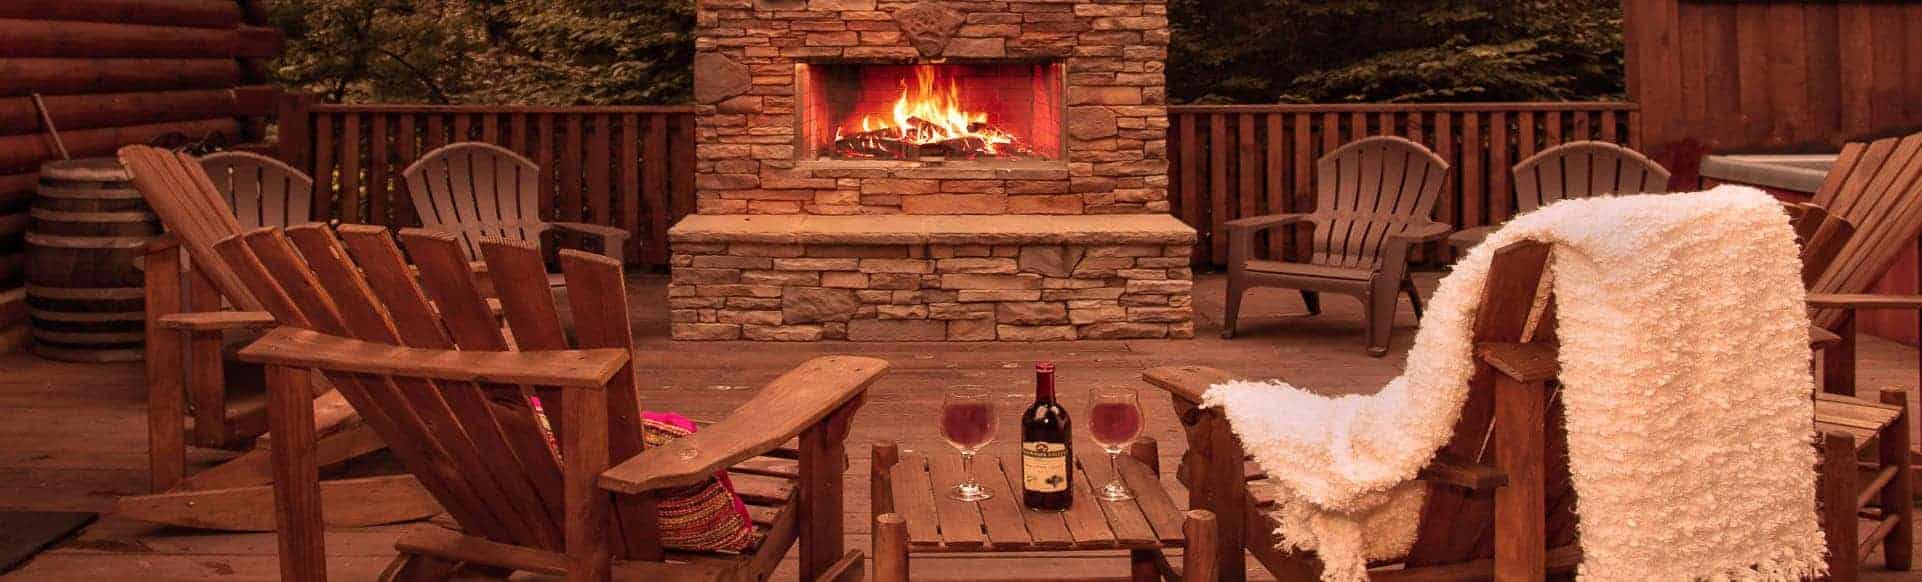 cozy outdoor fireplace